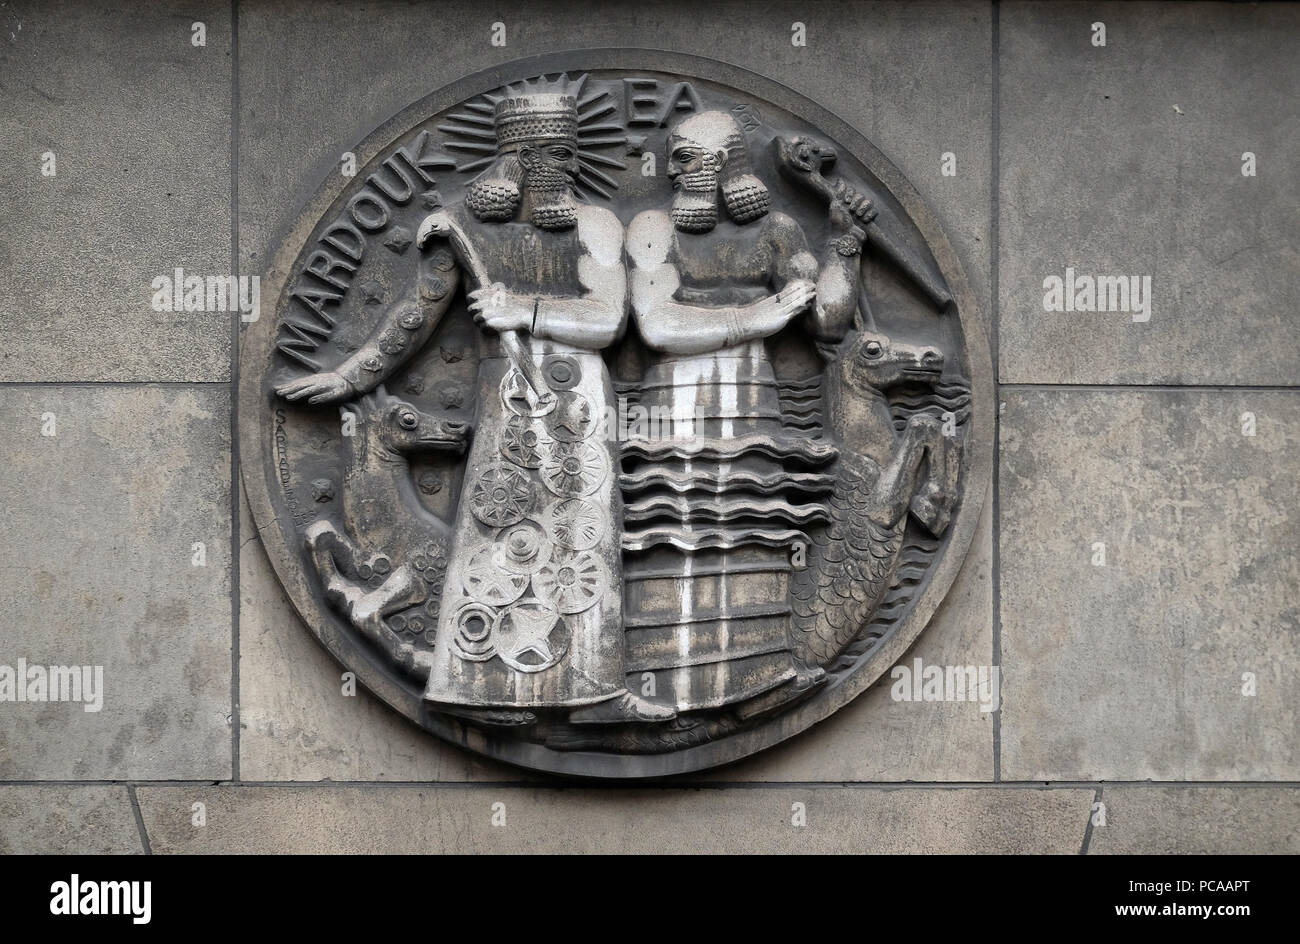 Marduk and Ea. Stone relief at the building of the Faculte de Medicine Paris, France Stock Photo